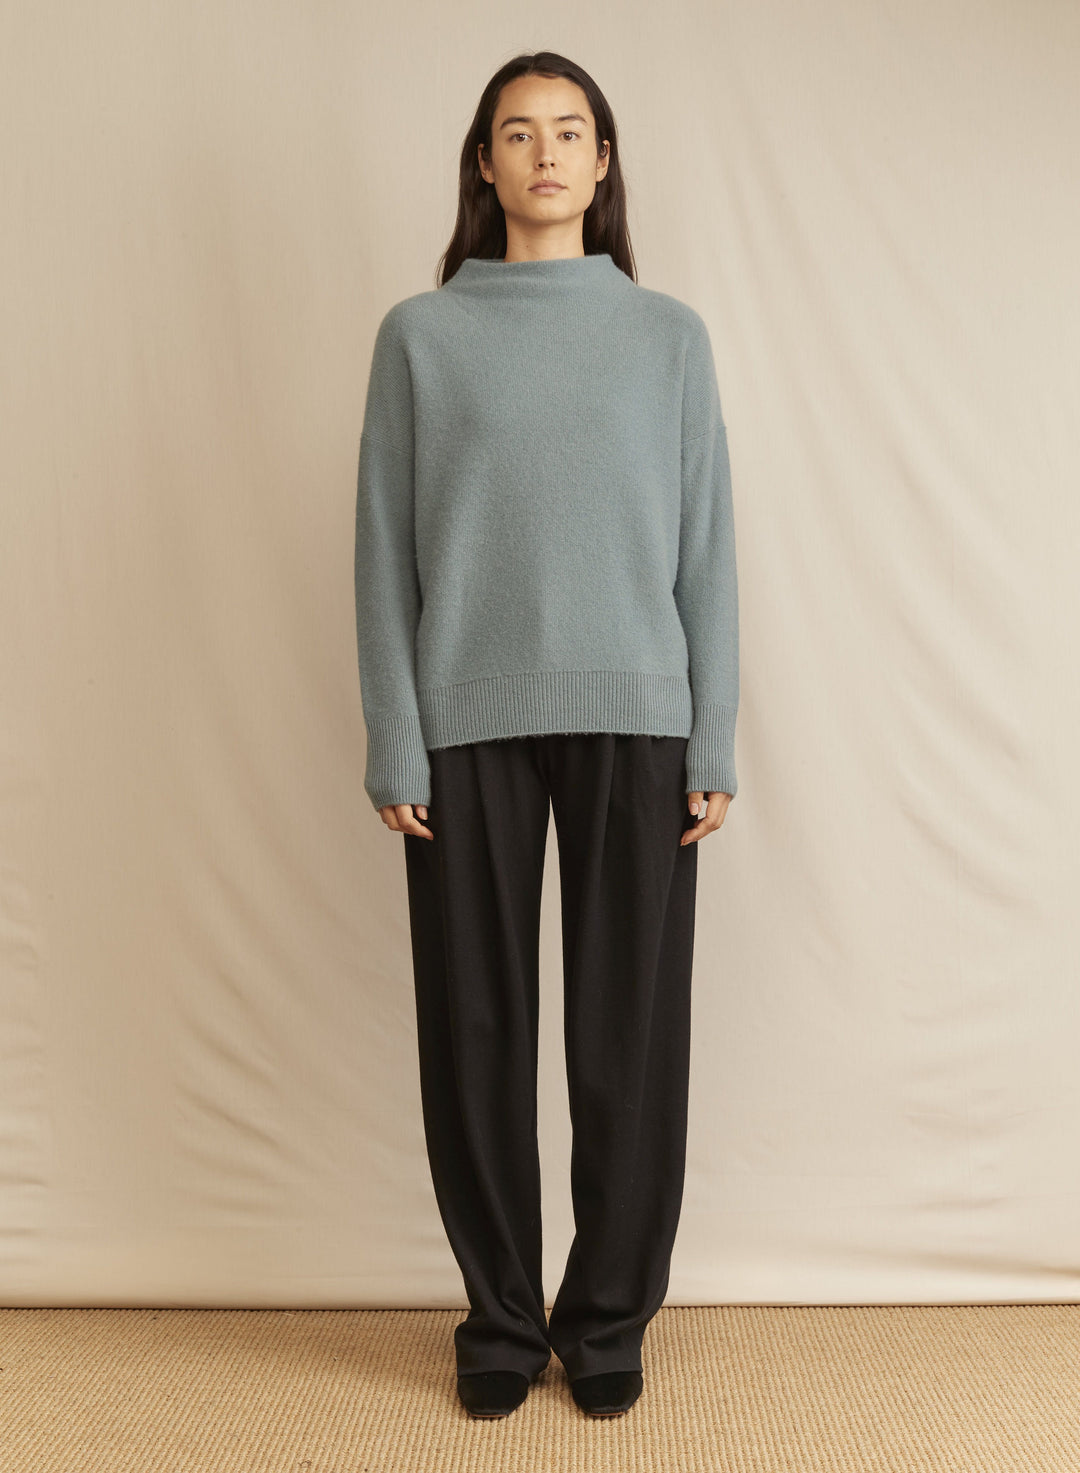 Vince - Boiled Funnel Neck Pullover in Heather Ocean